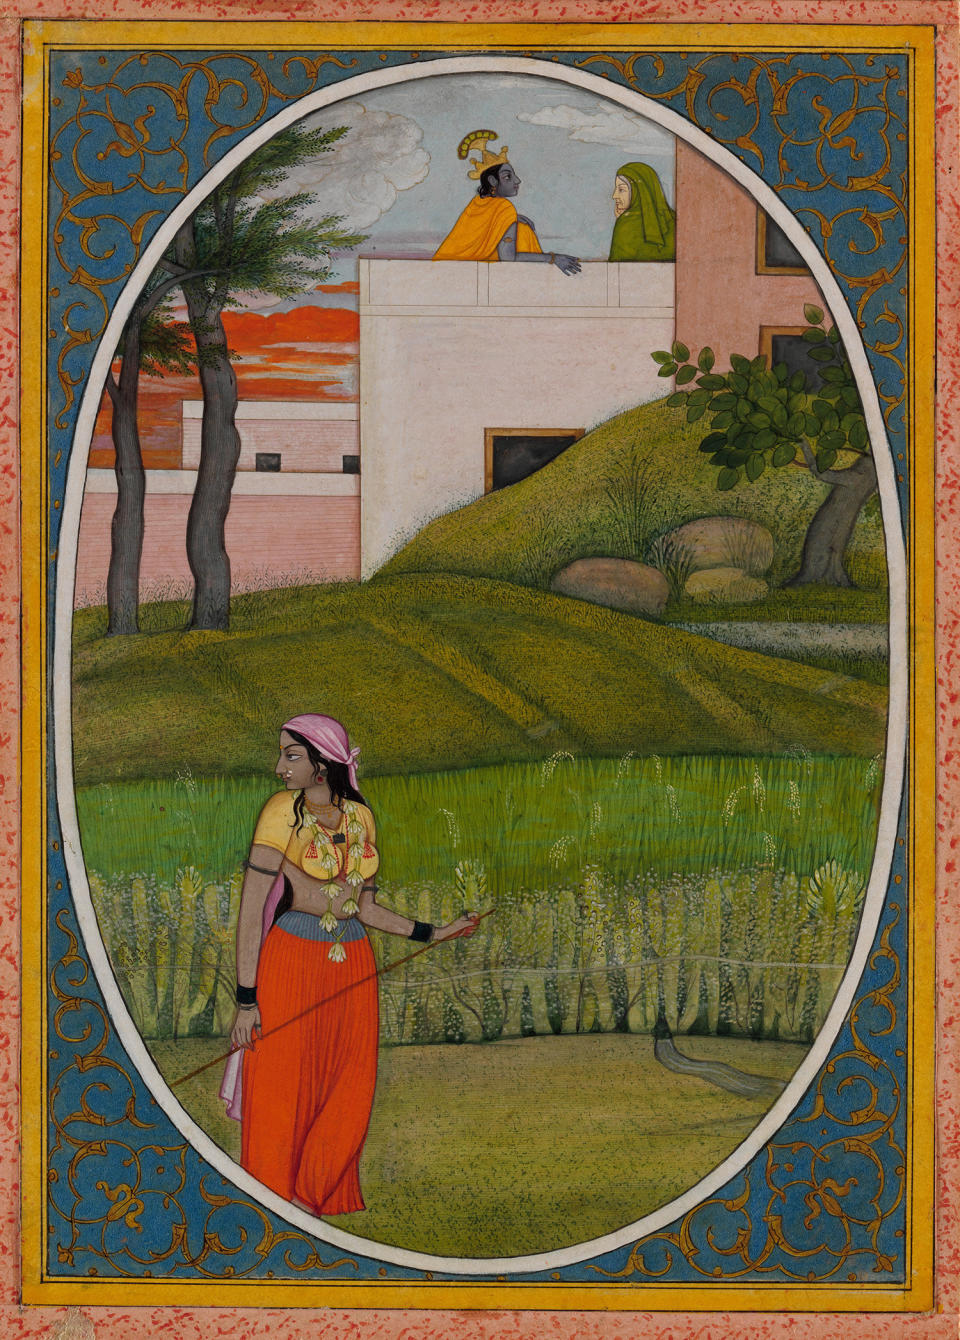 "The Village Beauty."&nbsp;Probably painted by the artist Fattu (active ca. 1770&ndash;1820)&nbsp;Illustrated folio from the dispersed "Kangra Bihari" Sat&nbsp;Sai (Seven Hundred Verses)&nbsp;Punjab Hills, kingdom of Kangra, ca. 1785.&nbsp;Opaque watercolor, ink, and gold on paper; narrow&nbsp;yellow and white borders with black inner rules; dark&nbsp;blue spandrels decorated with gold arabesque;&nbsp;painting 7 3/8 x 5 3/16 in.&nbsp;Promised Gift of the Kronos Collections, 2015.